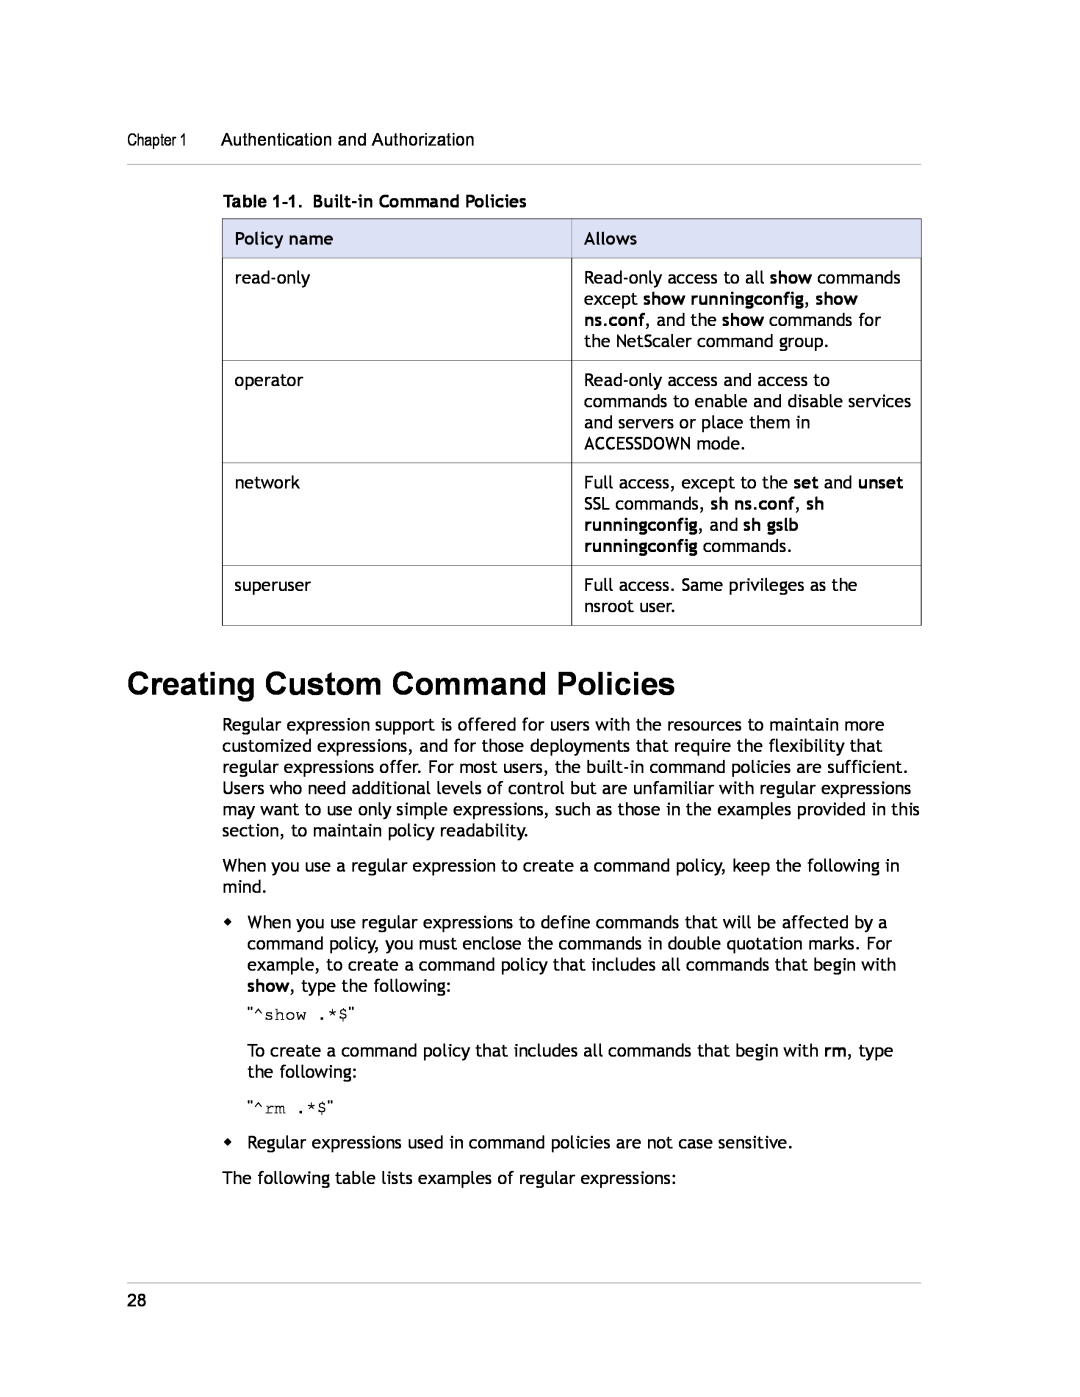 Citrix Systems CITRIX NETSCALER 9.3 Creating Custom Command Policies, 1. Built-in Command Policies, Policy name, Allows 